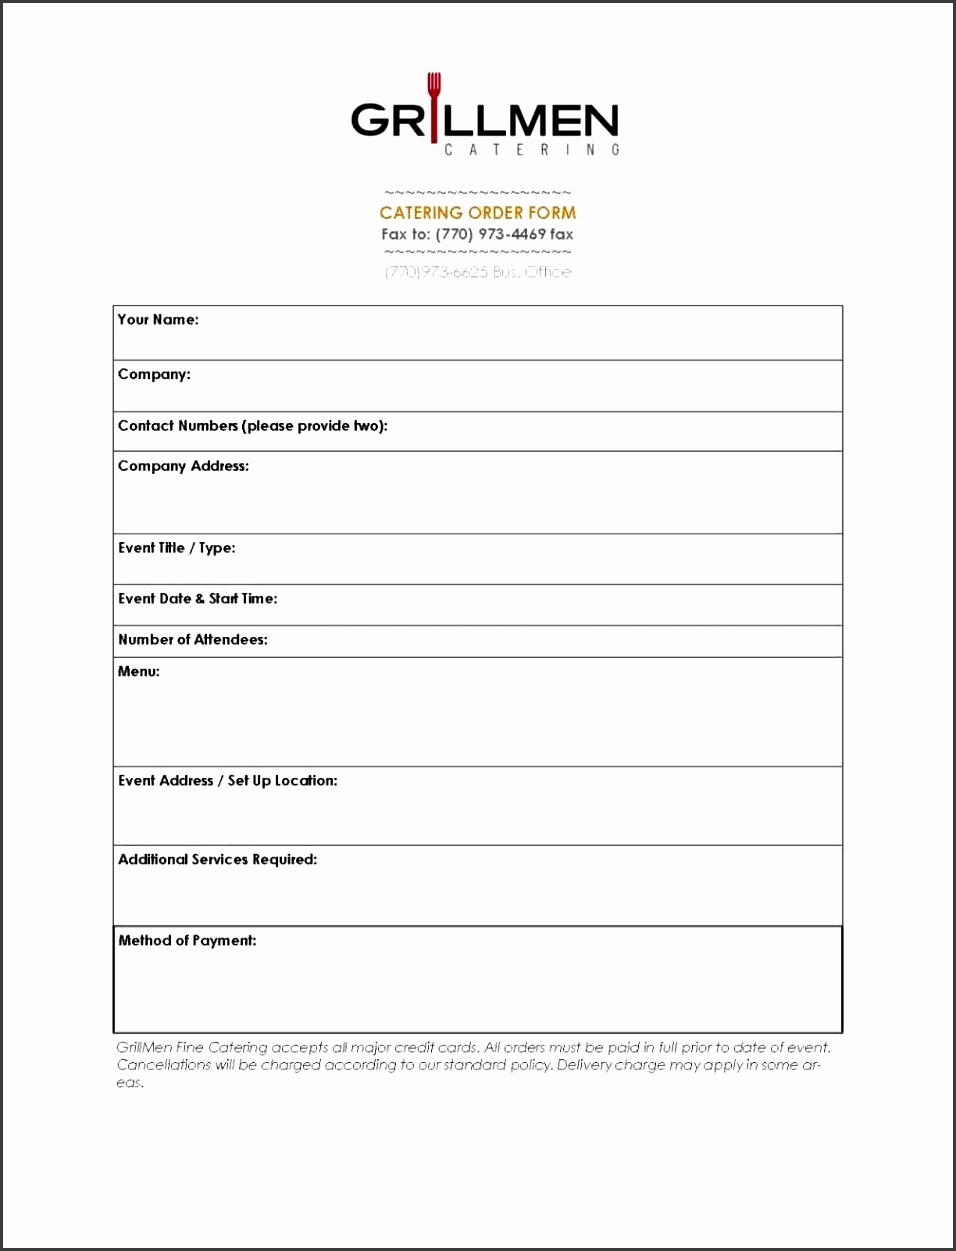 Shipping Form Template Certificate Participation Format